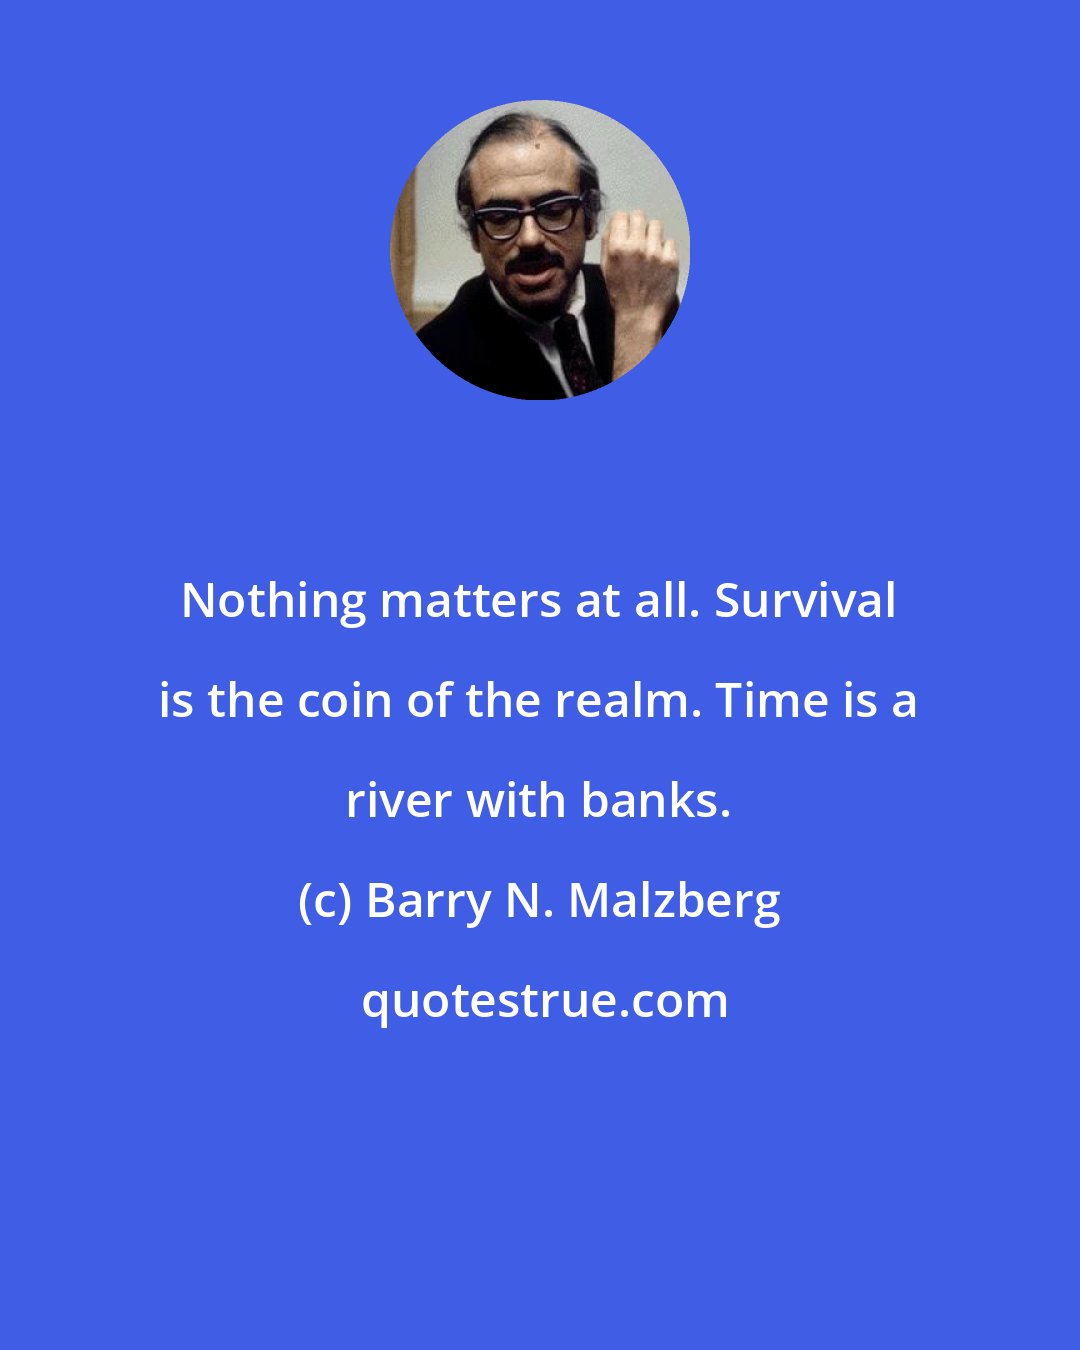 Barry N. Malzberg: Nothing matters at all. Survival is the coin of the realm. Time is a river with banks.